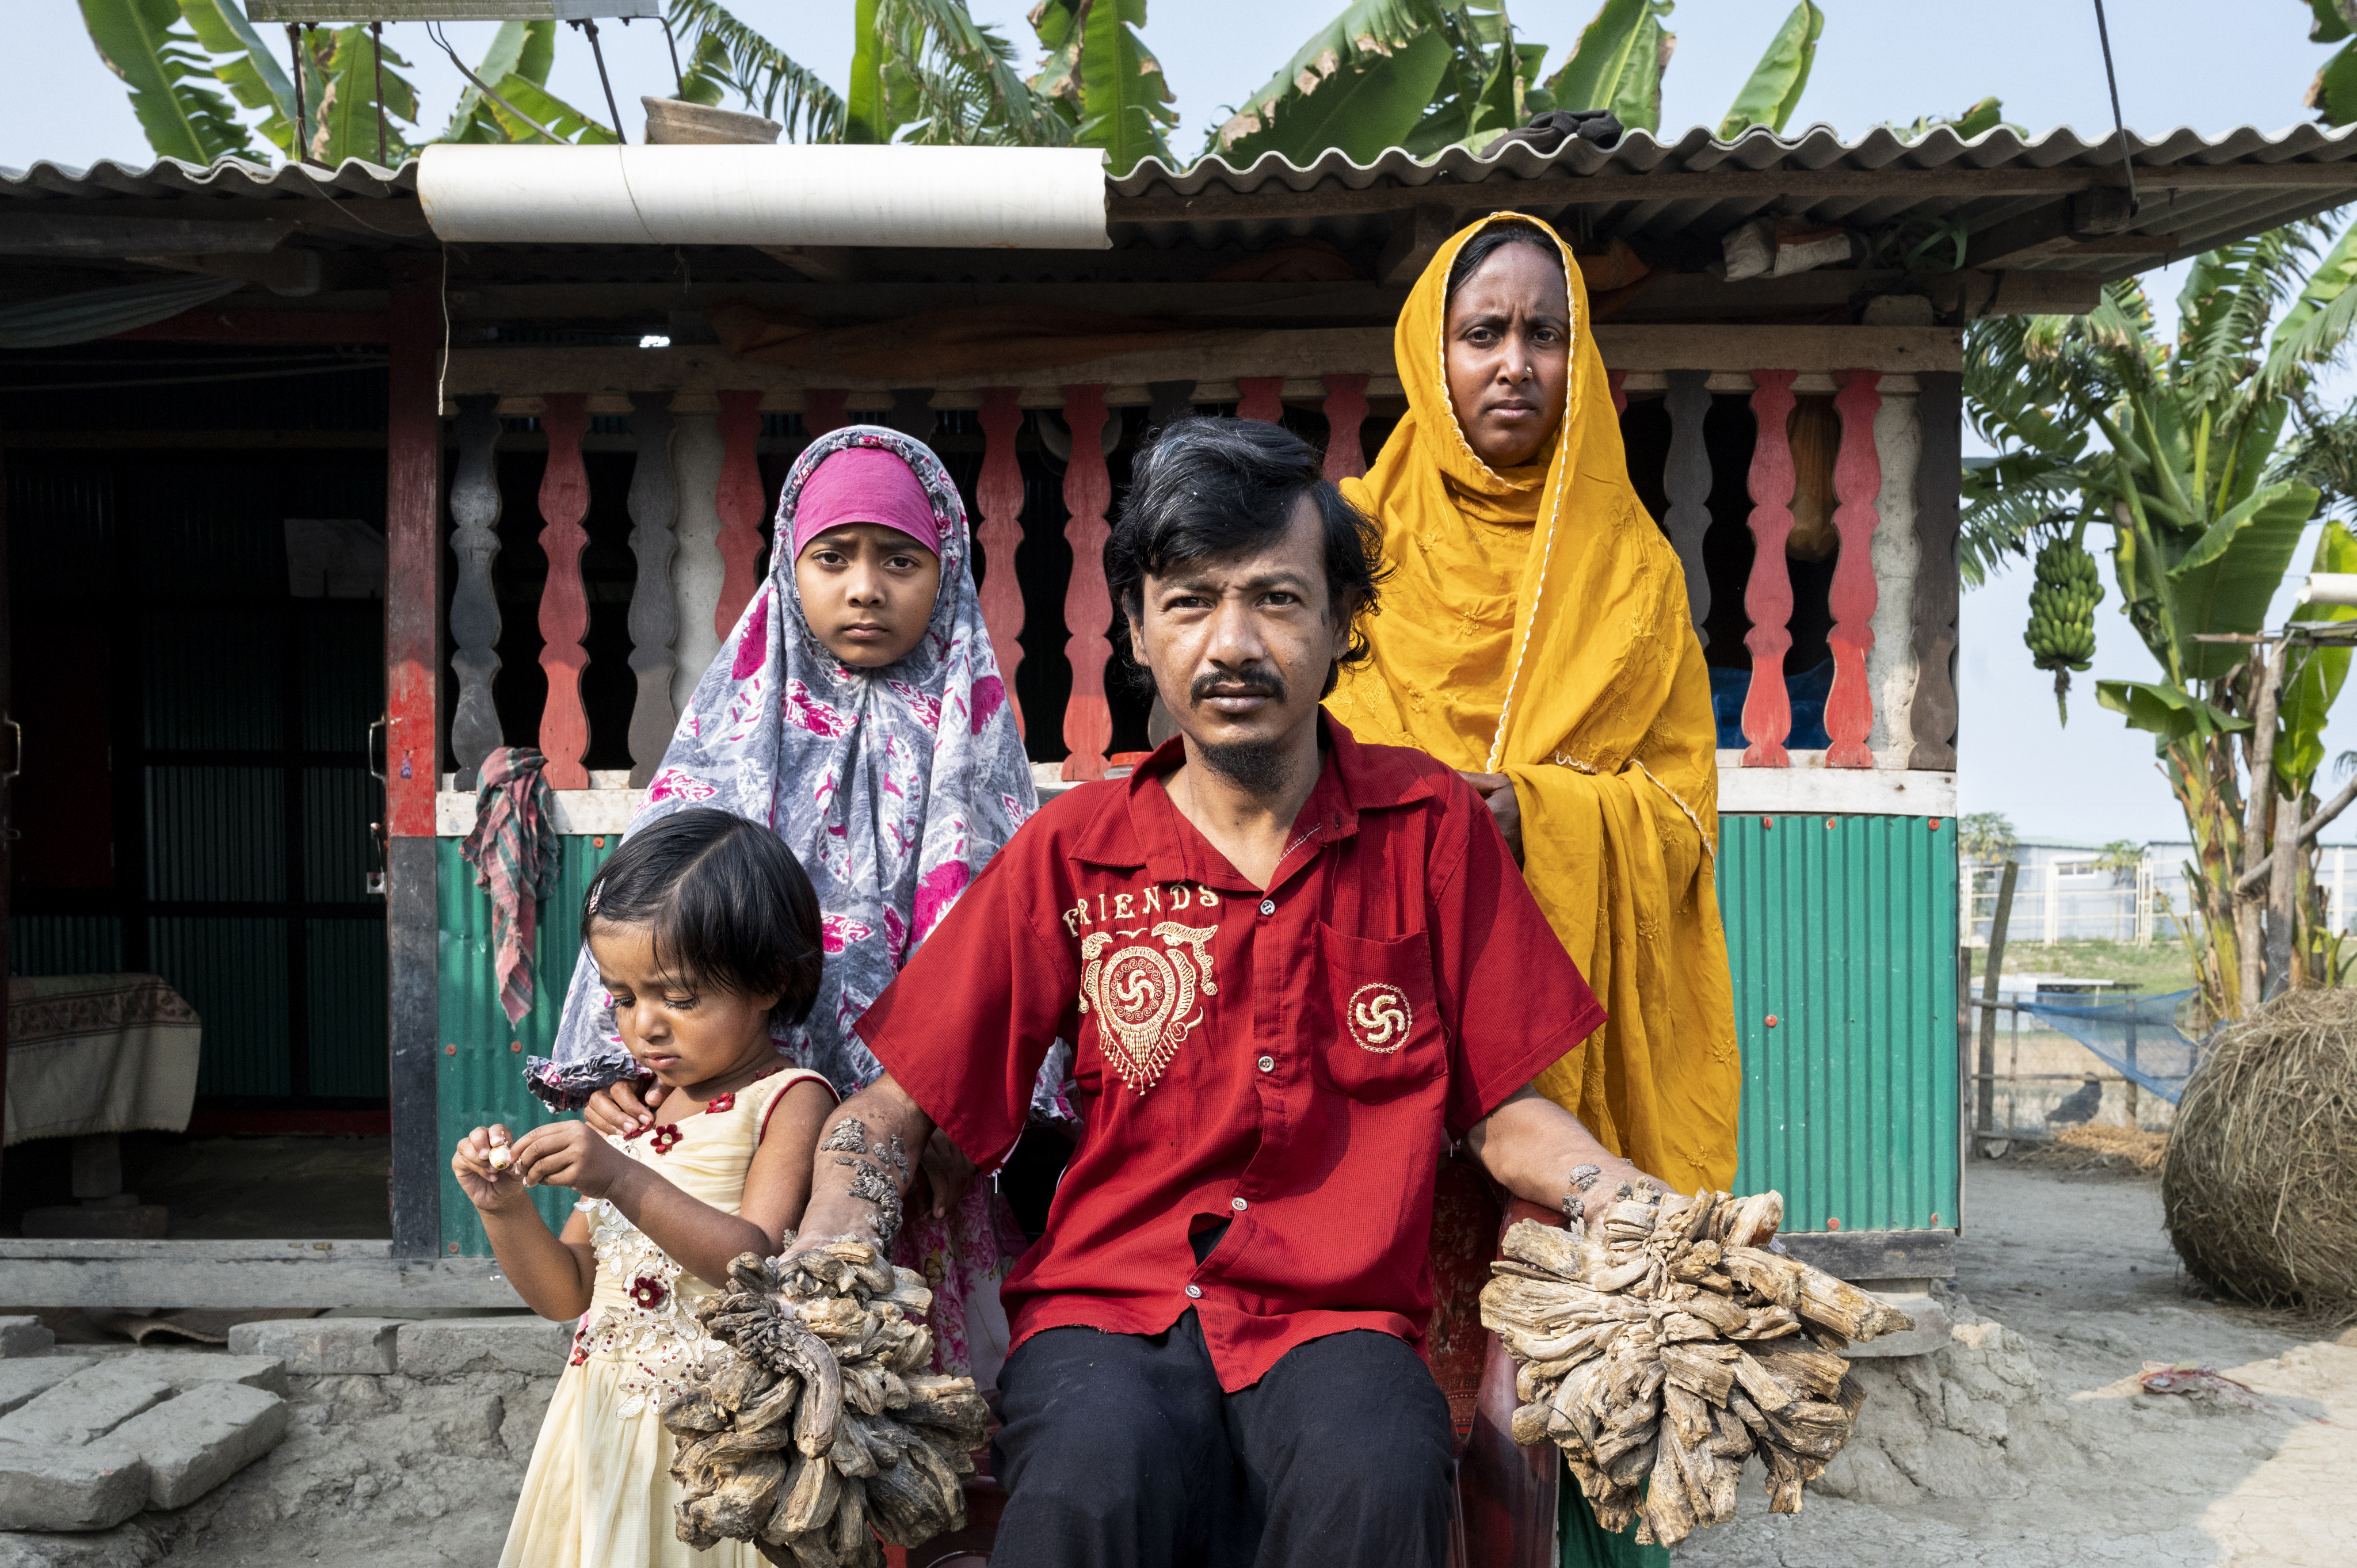 Portrait of Abul Bajandar, his wife Alhima Khauton and two daughters, Bangladesh, 2023. Abul Bajandar know as “Treeman”  - gigantic warts cover his hands and feet, huge protuberances with the texture of tree bark growing especially big around fingers and toes, but also in the arms and legs. These are an extremely rare symptom of his extremely rare condition, epidermodysplasia verruciformis. There are less than 10 documented cases worldwide and, since there is no known cure.&#xA;&#xA;Credit: Miguel Candela